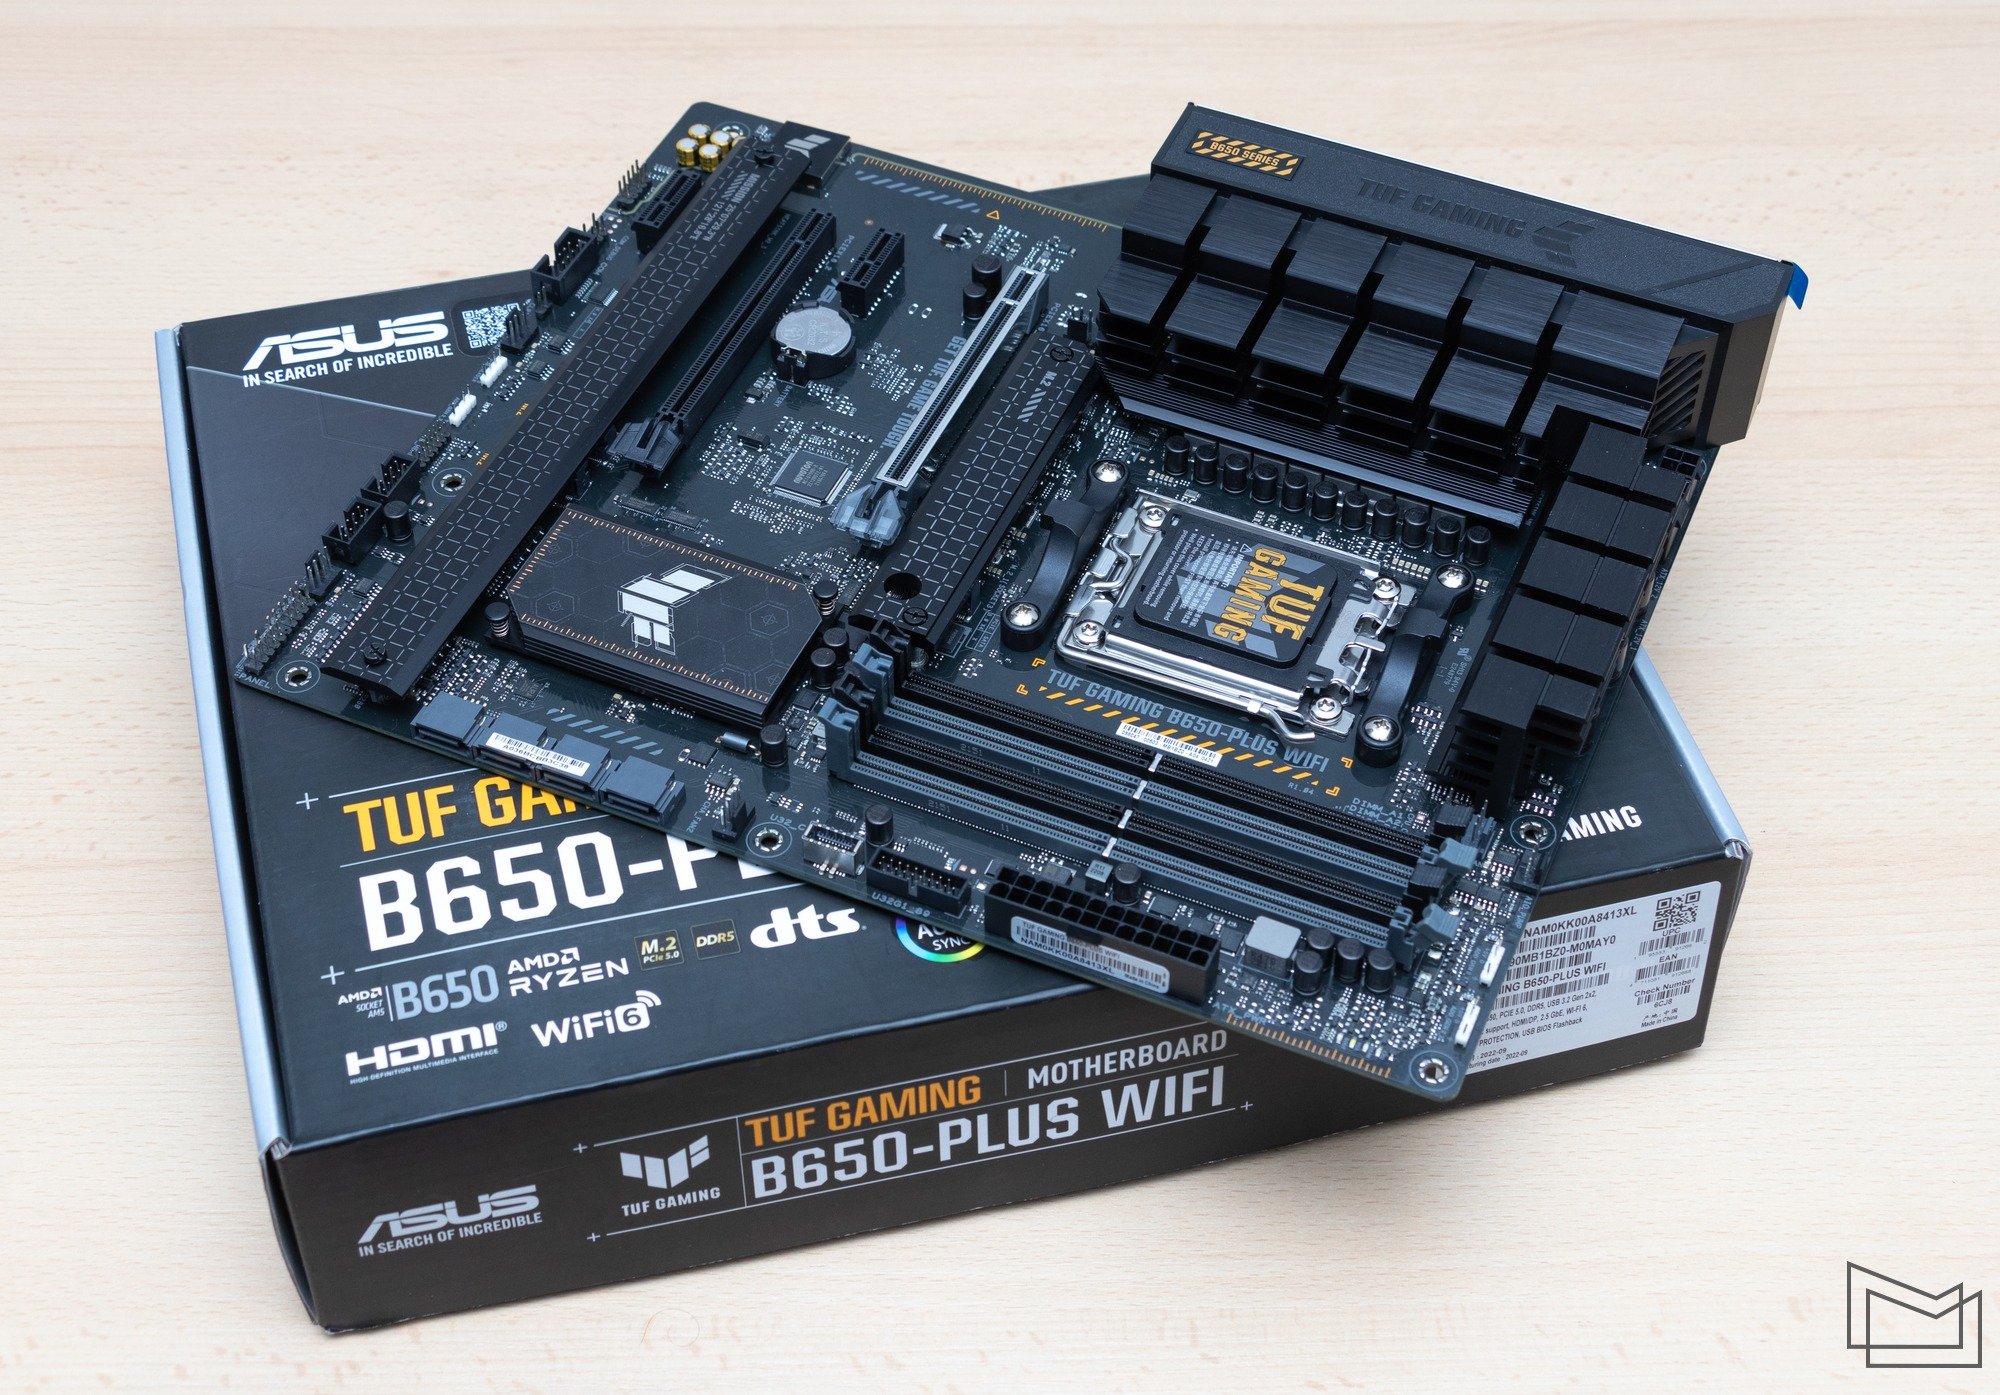 ASUS TUF GAMING B650-PLUS WIFI motherboard review: is it time for